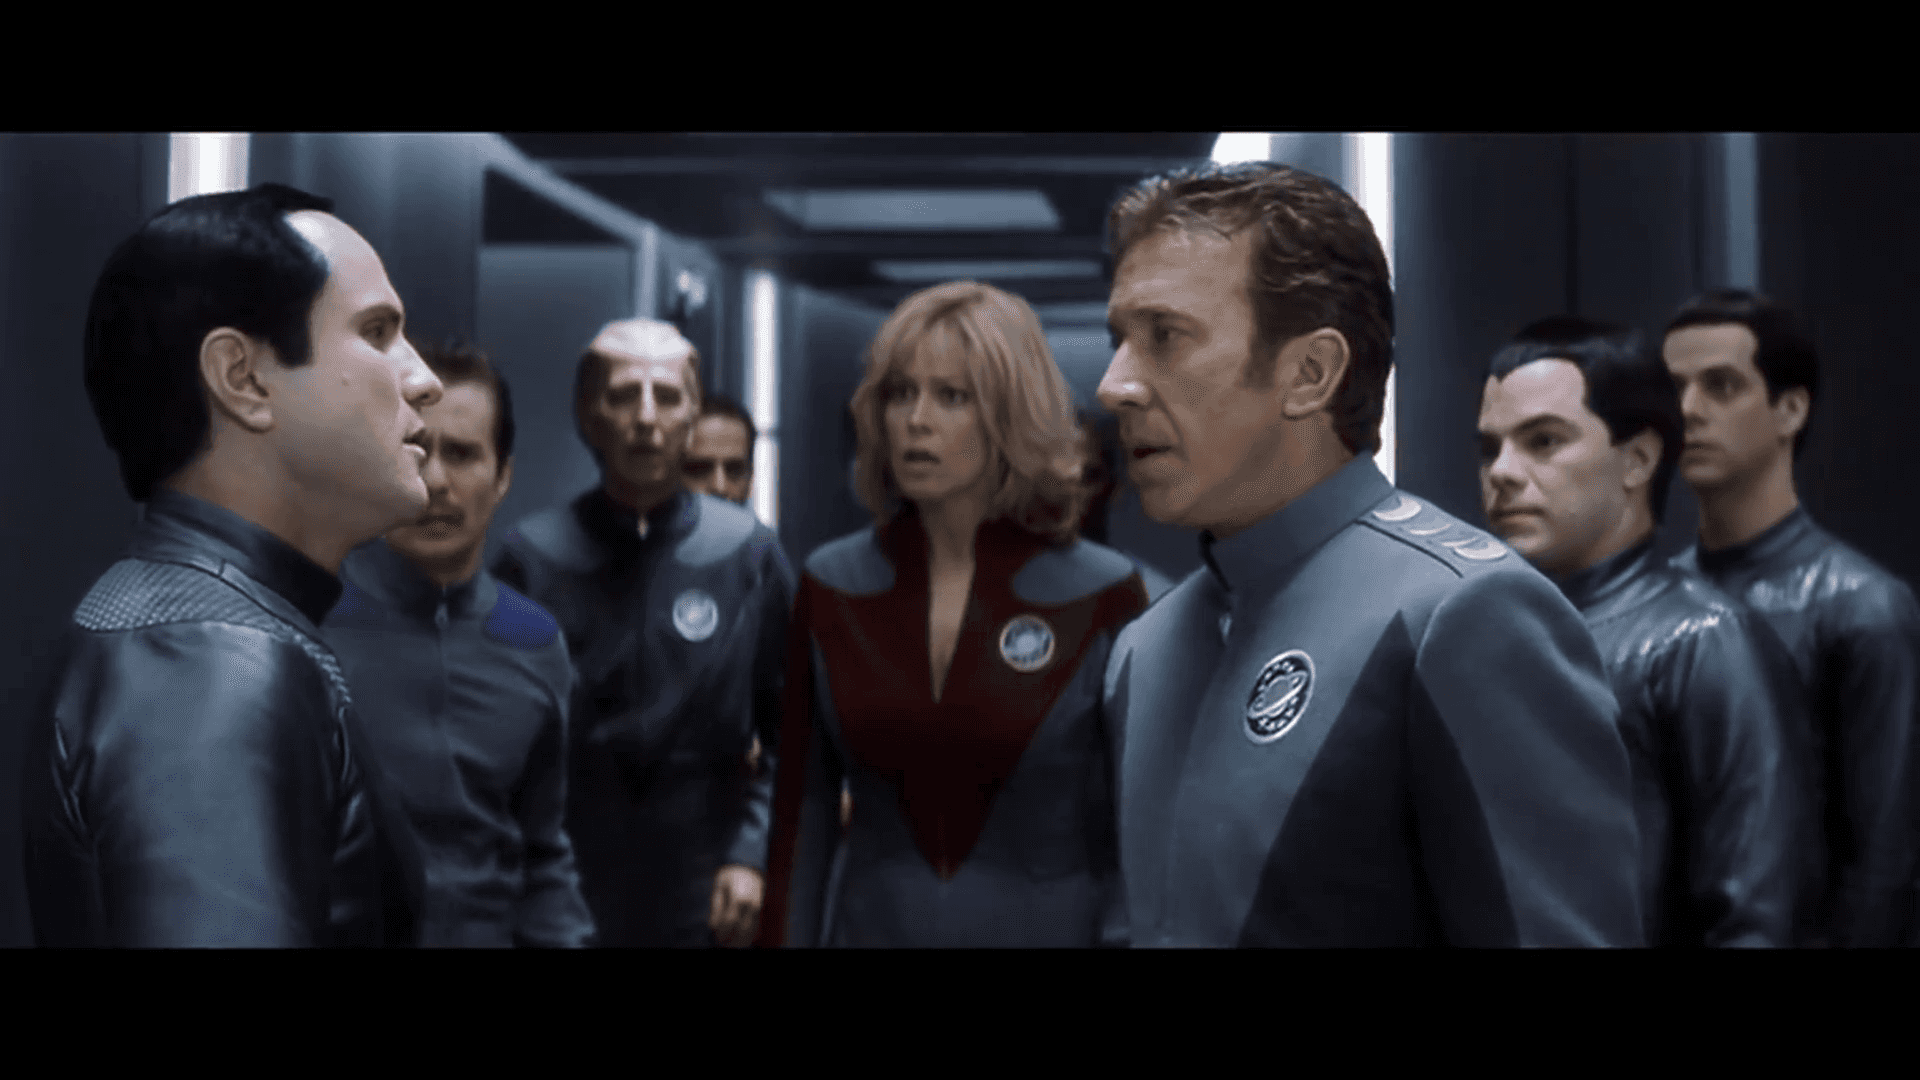 Galaxy Quest Cast Ready for Adventure Wallpaper